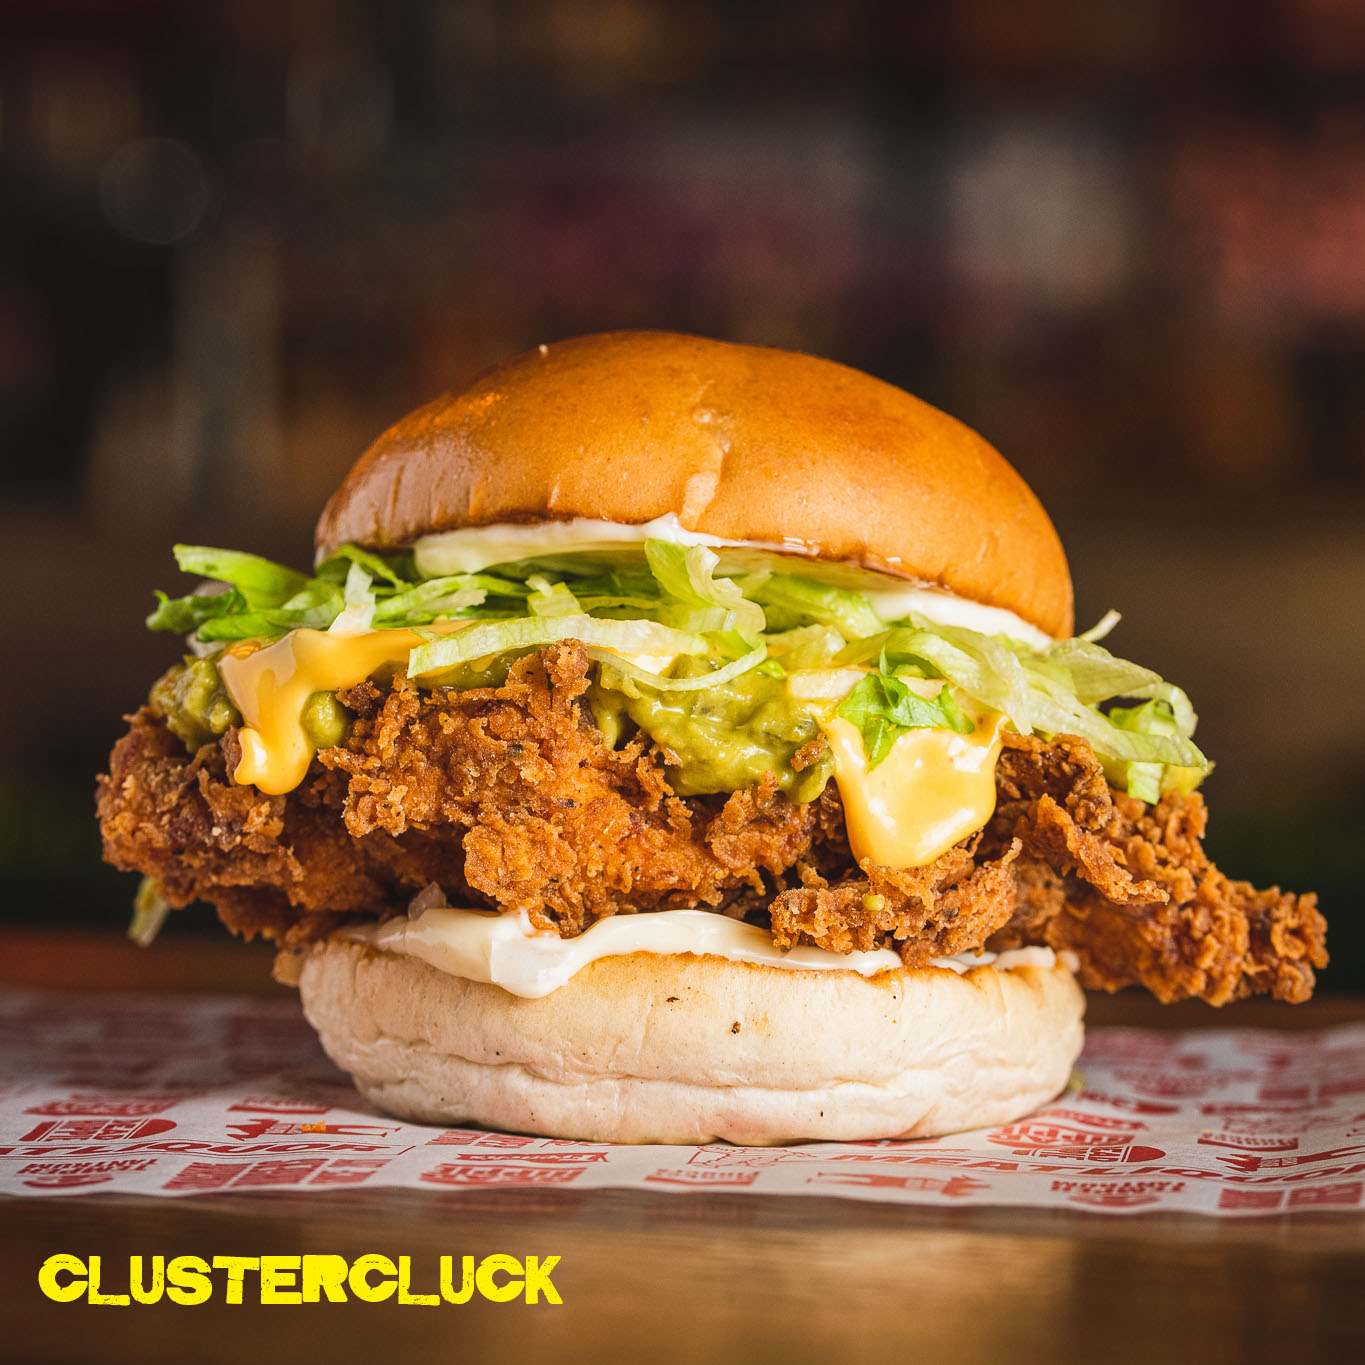 CLUSTERCLUCK | DREDGED & FRIED CHICKEN BREAST, GREEN CHILLI BUTTER, DICED JALAPENO, MAYO, DICED WHITE ONION, CHEESE SAUCE, LETTUCE Image